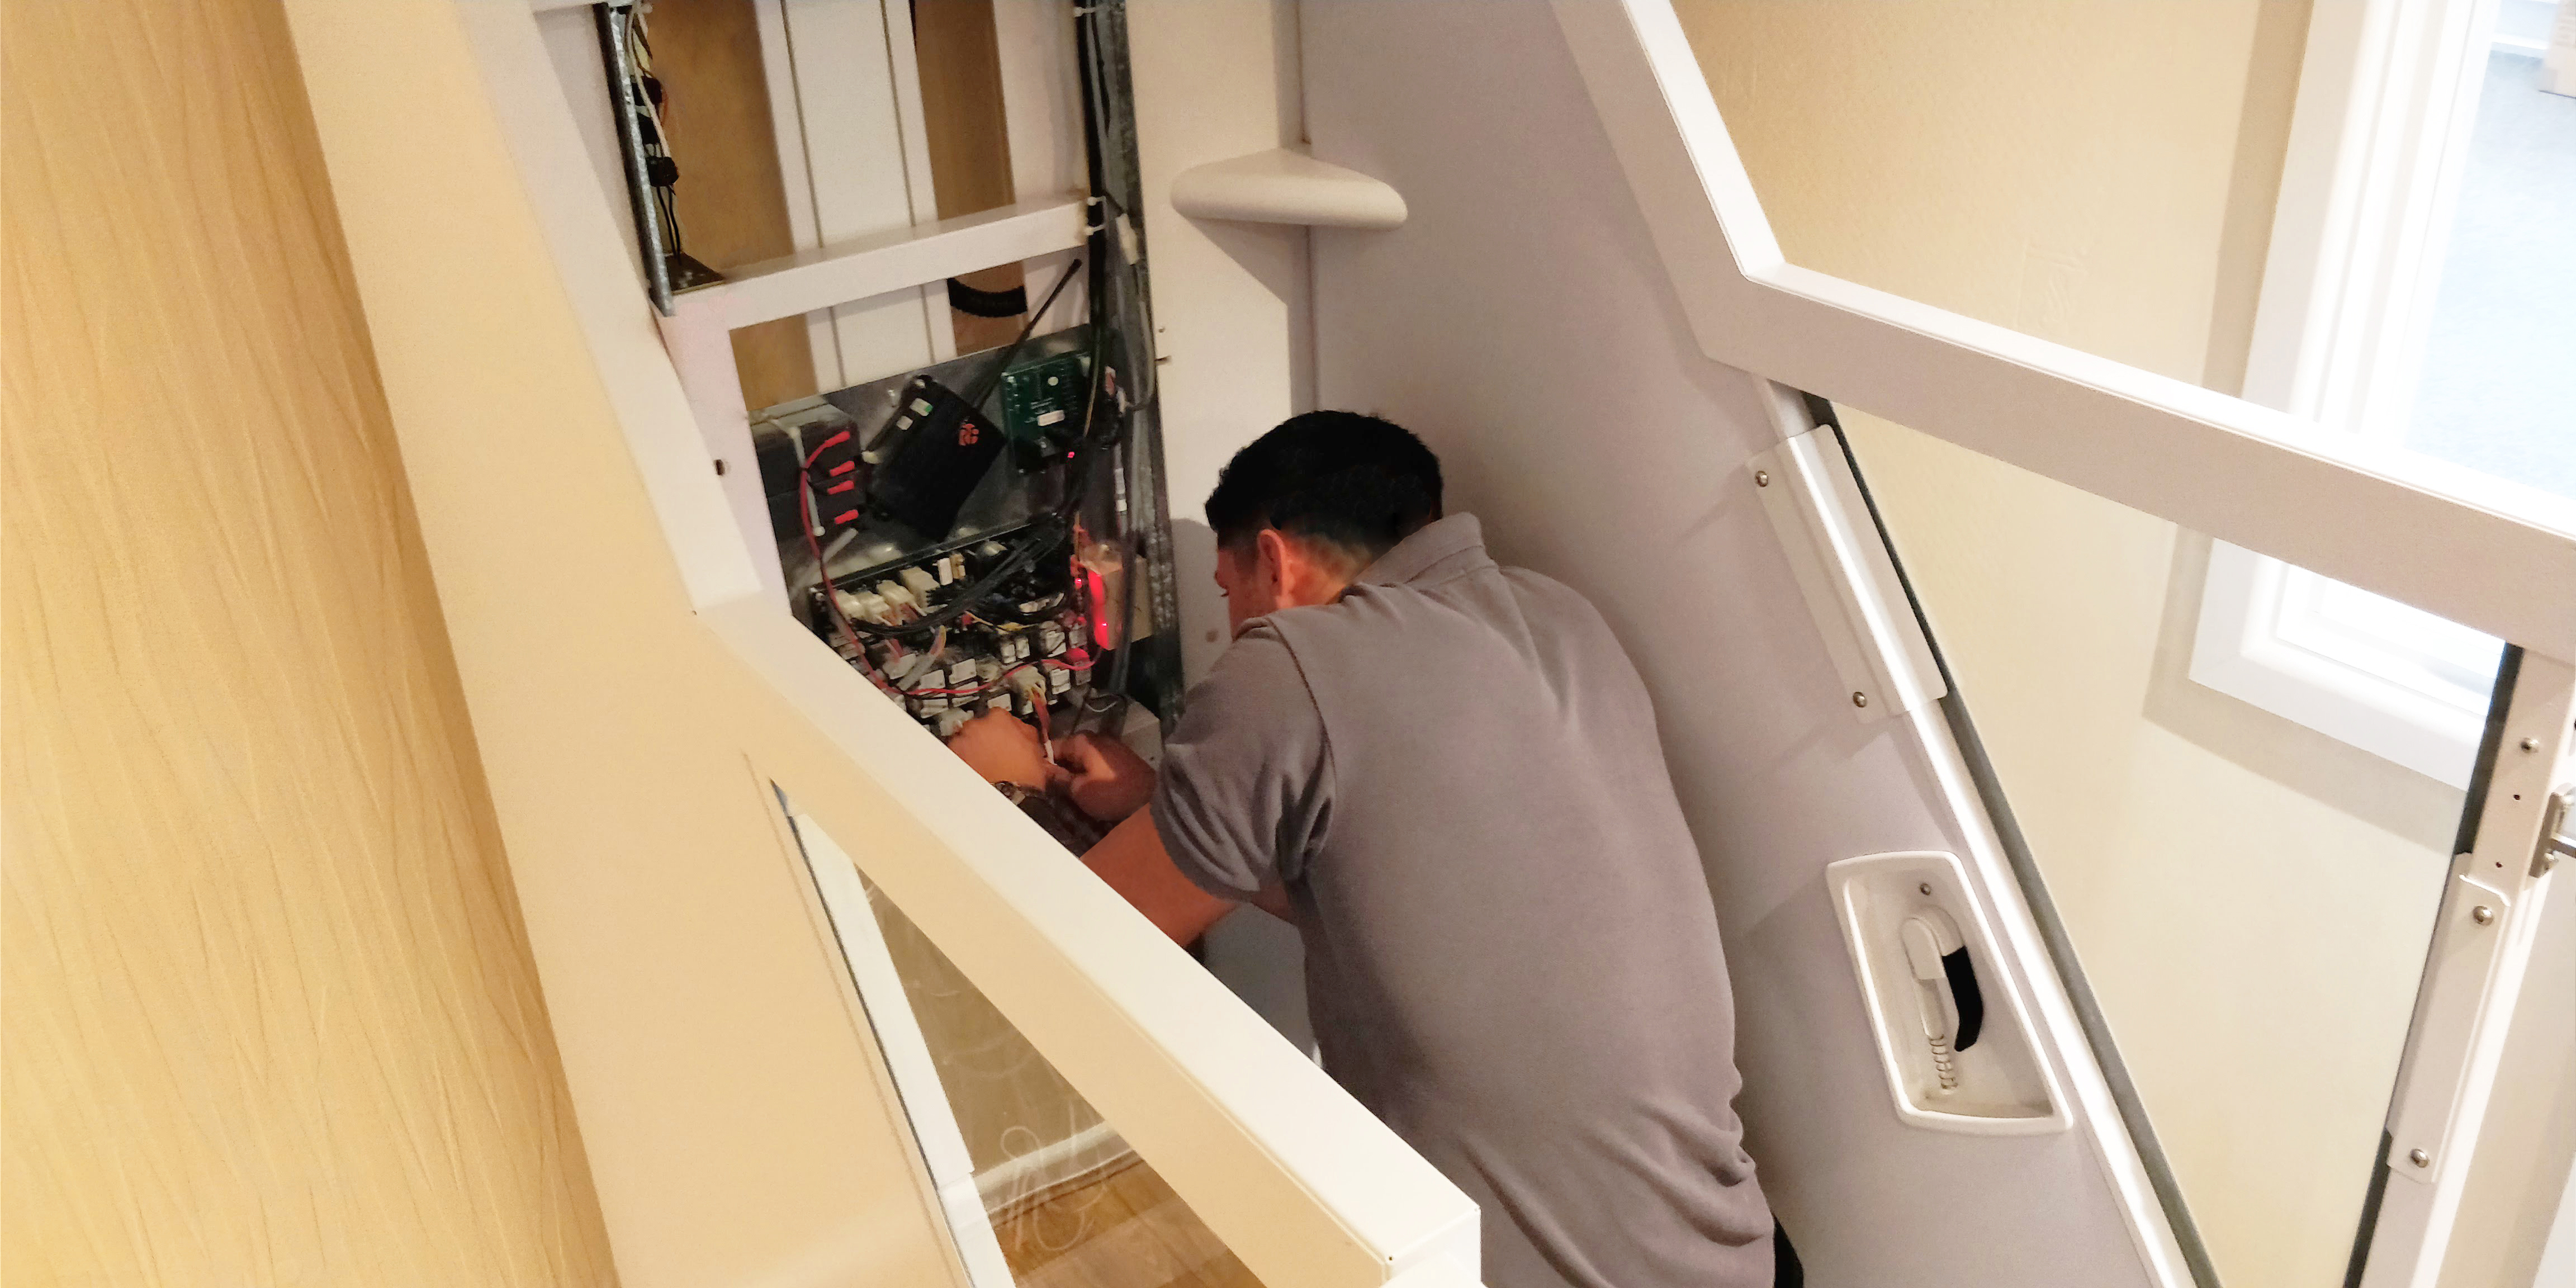 A member of our maintenance team, working on a home lift.